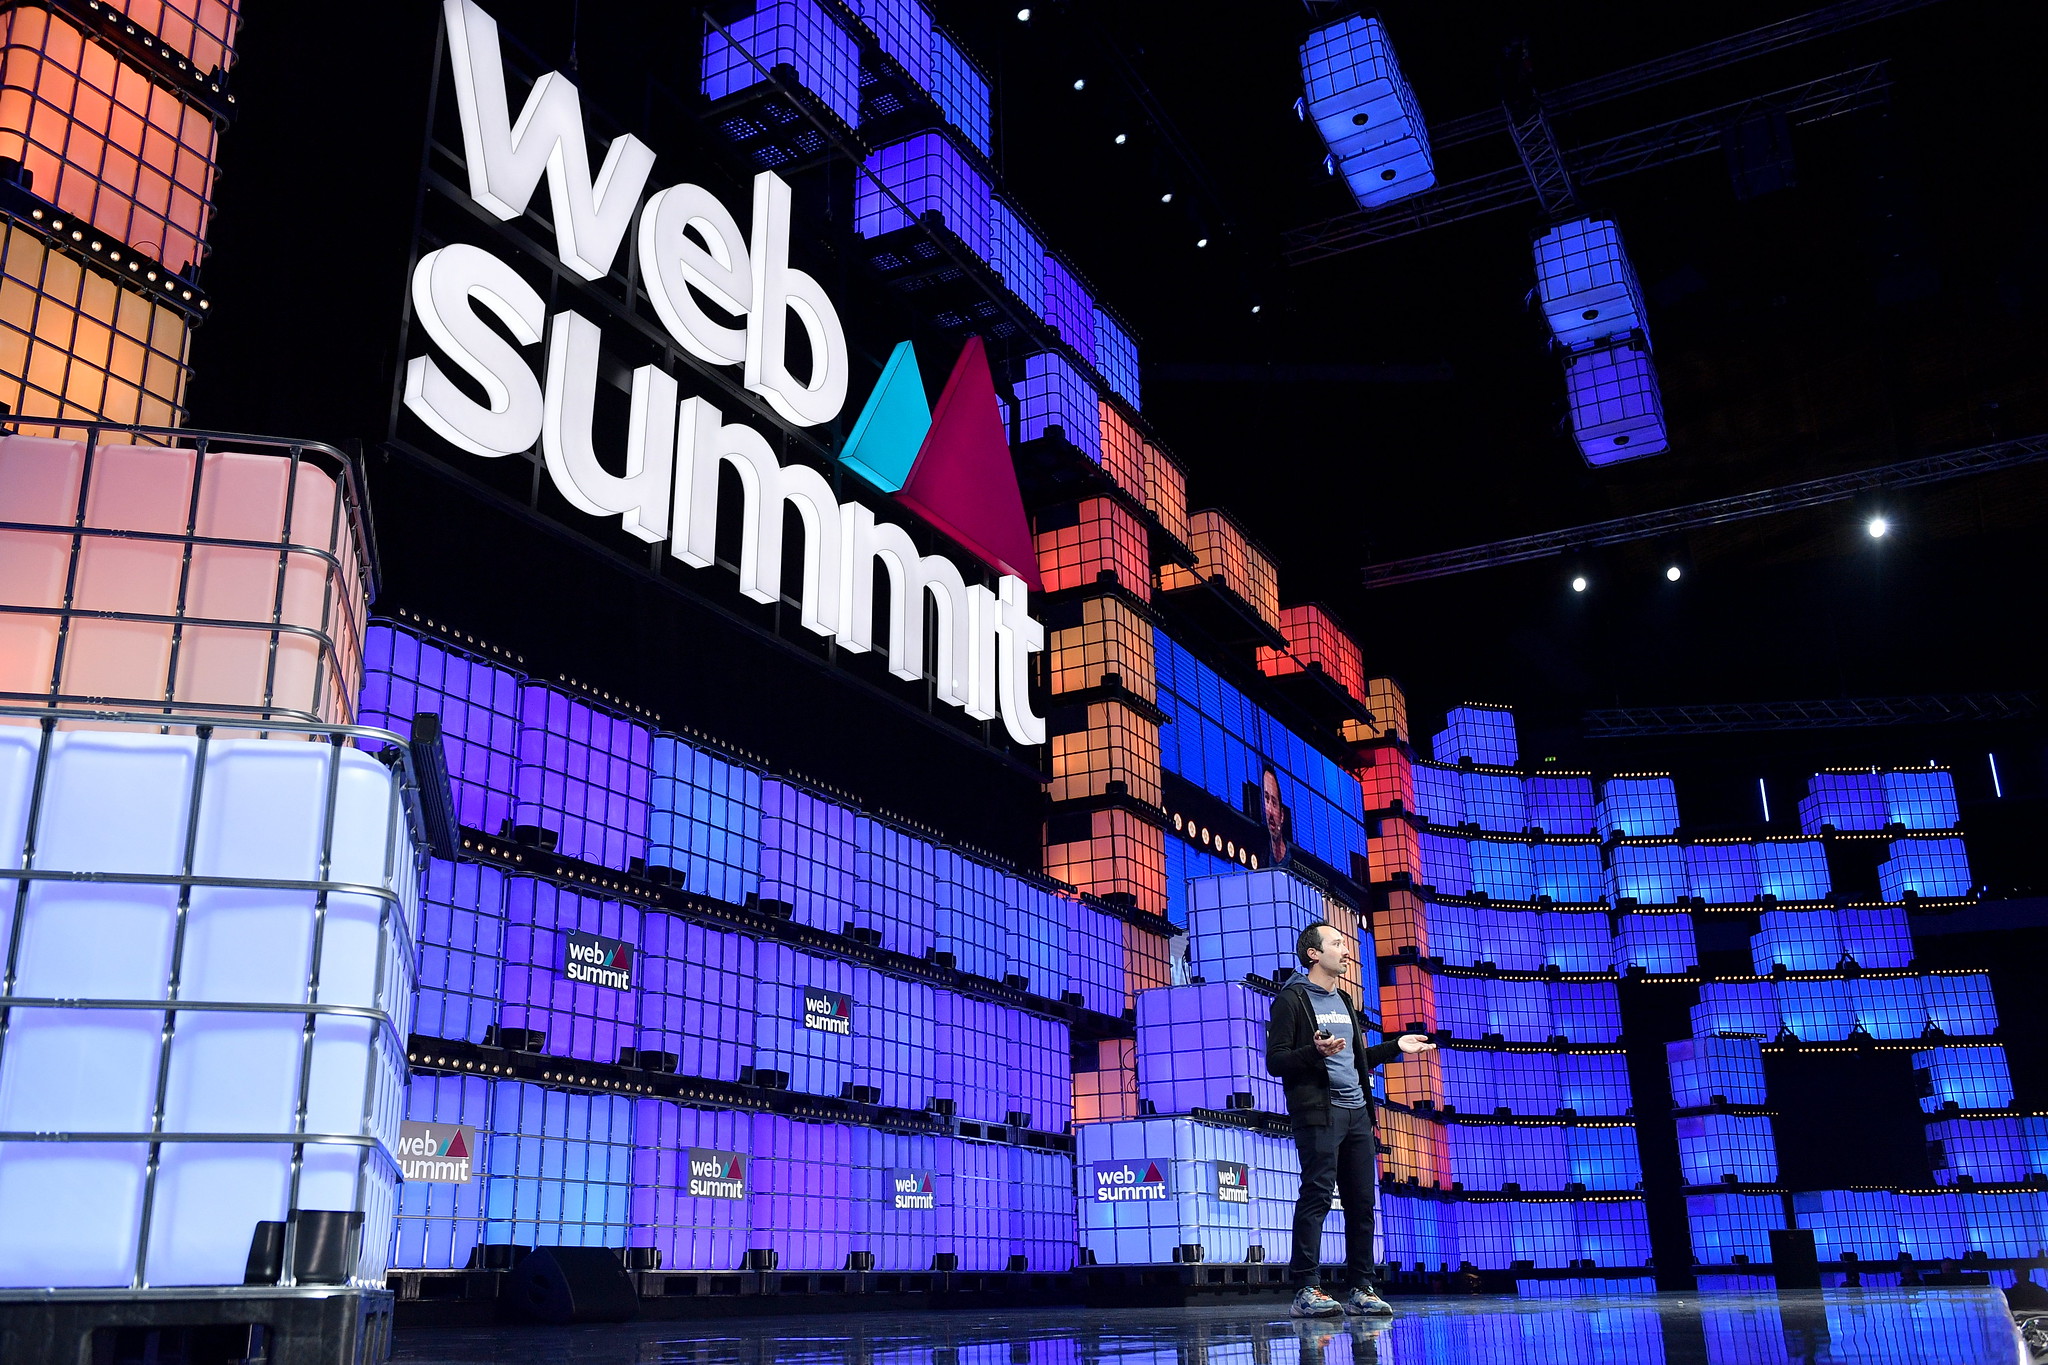 Speaker Sebastien Borget, The Sandbox, on Centre Stage during day two of Web Summit 2022